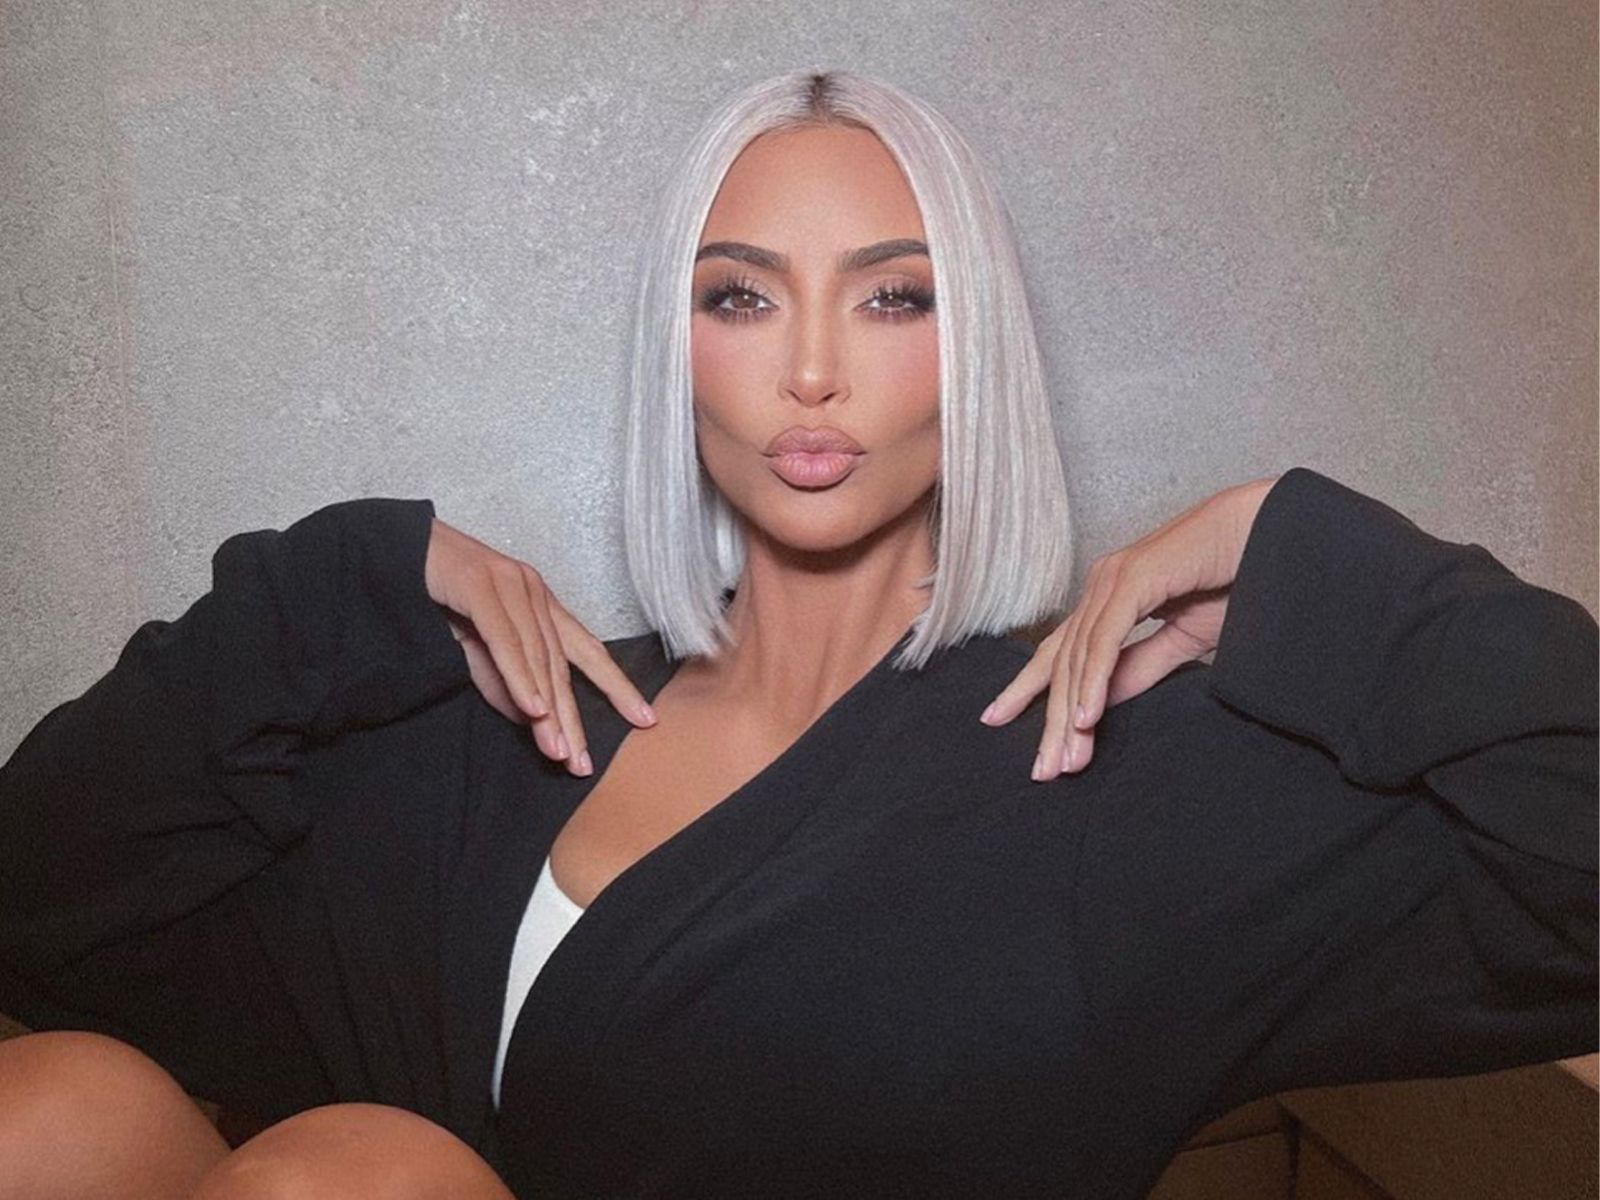 Kim Kardashian launches her own podcast on Spotify